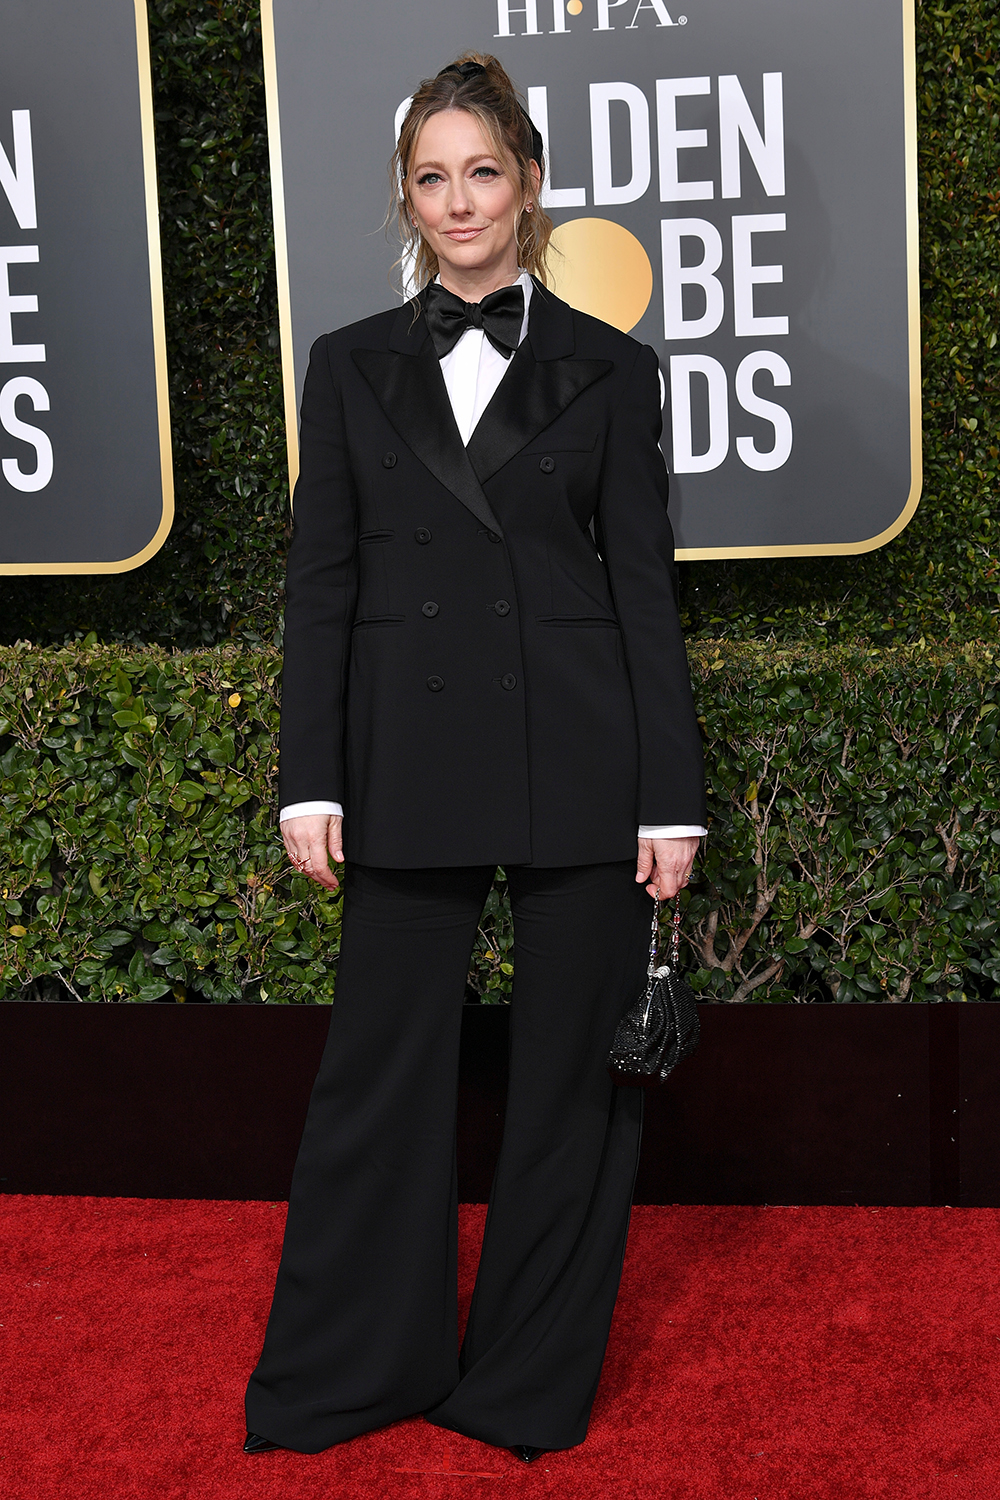 Mandatory Credit: Photo by Rob Latour/REX/Shutterstock (10048066fs) Judy Greer 76th Annual Golden Globe Awards, Arrivals, Los Angeles, USA - 06 Jan 2019